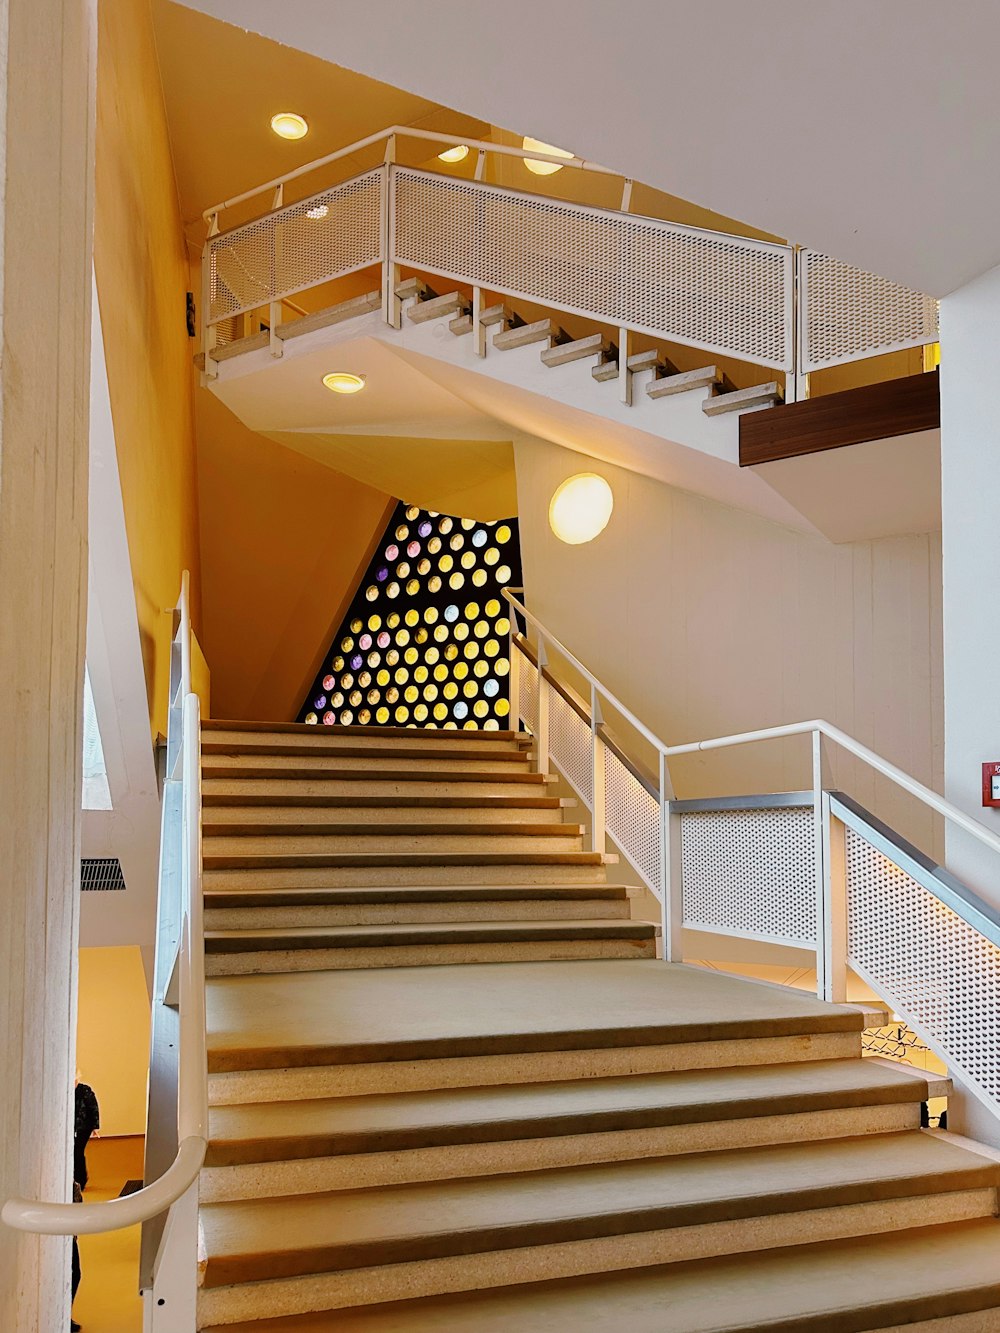 a staircase leading up to the top floor of a building